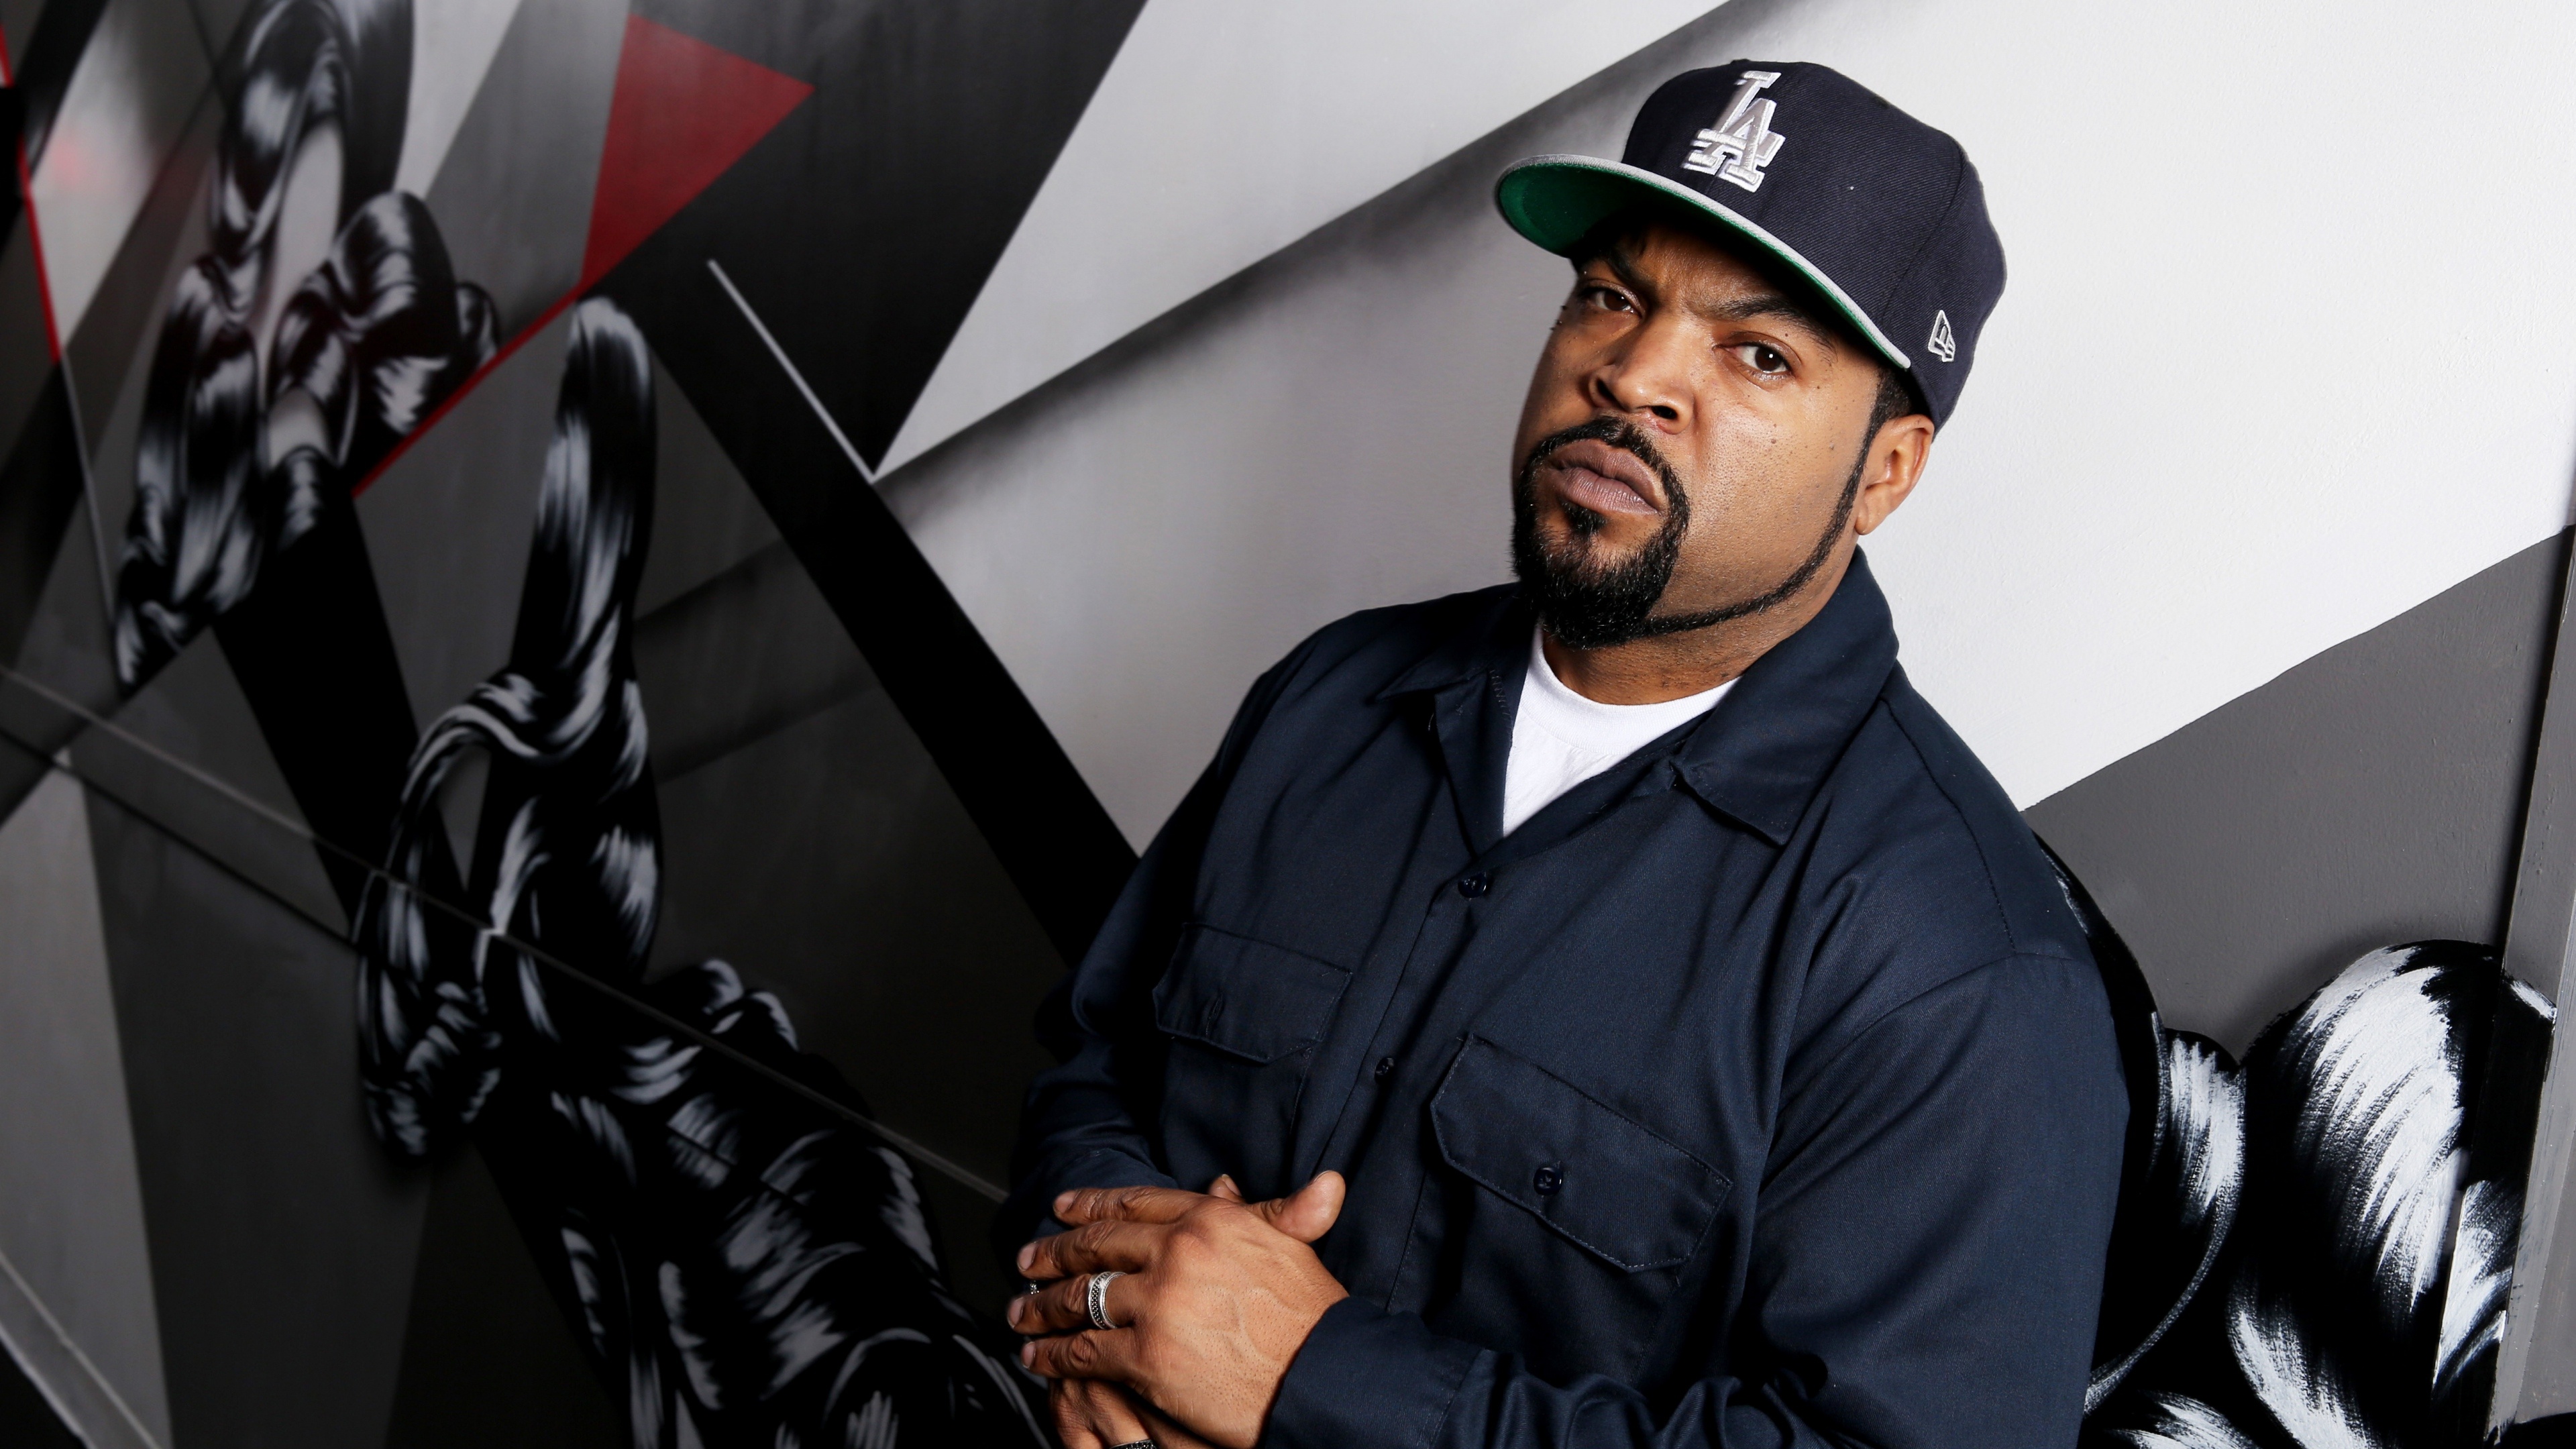 Friday Ice Cube wallpapers, Free backgrounds, 3840x2160 4K Desktop